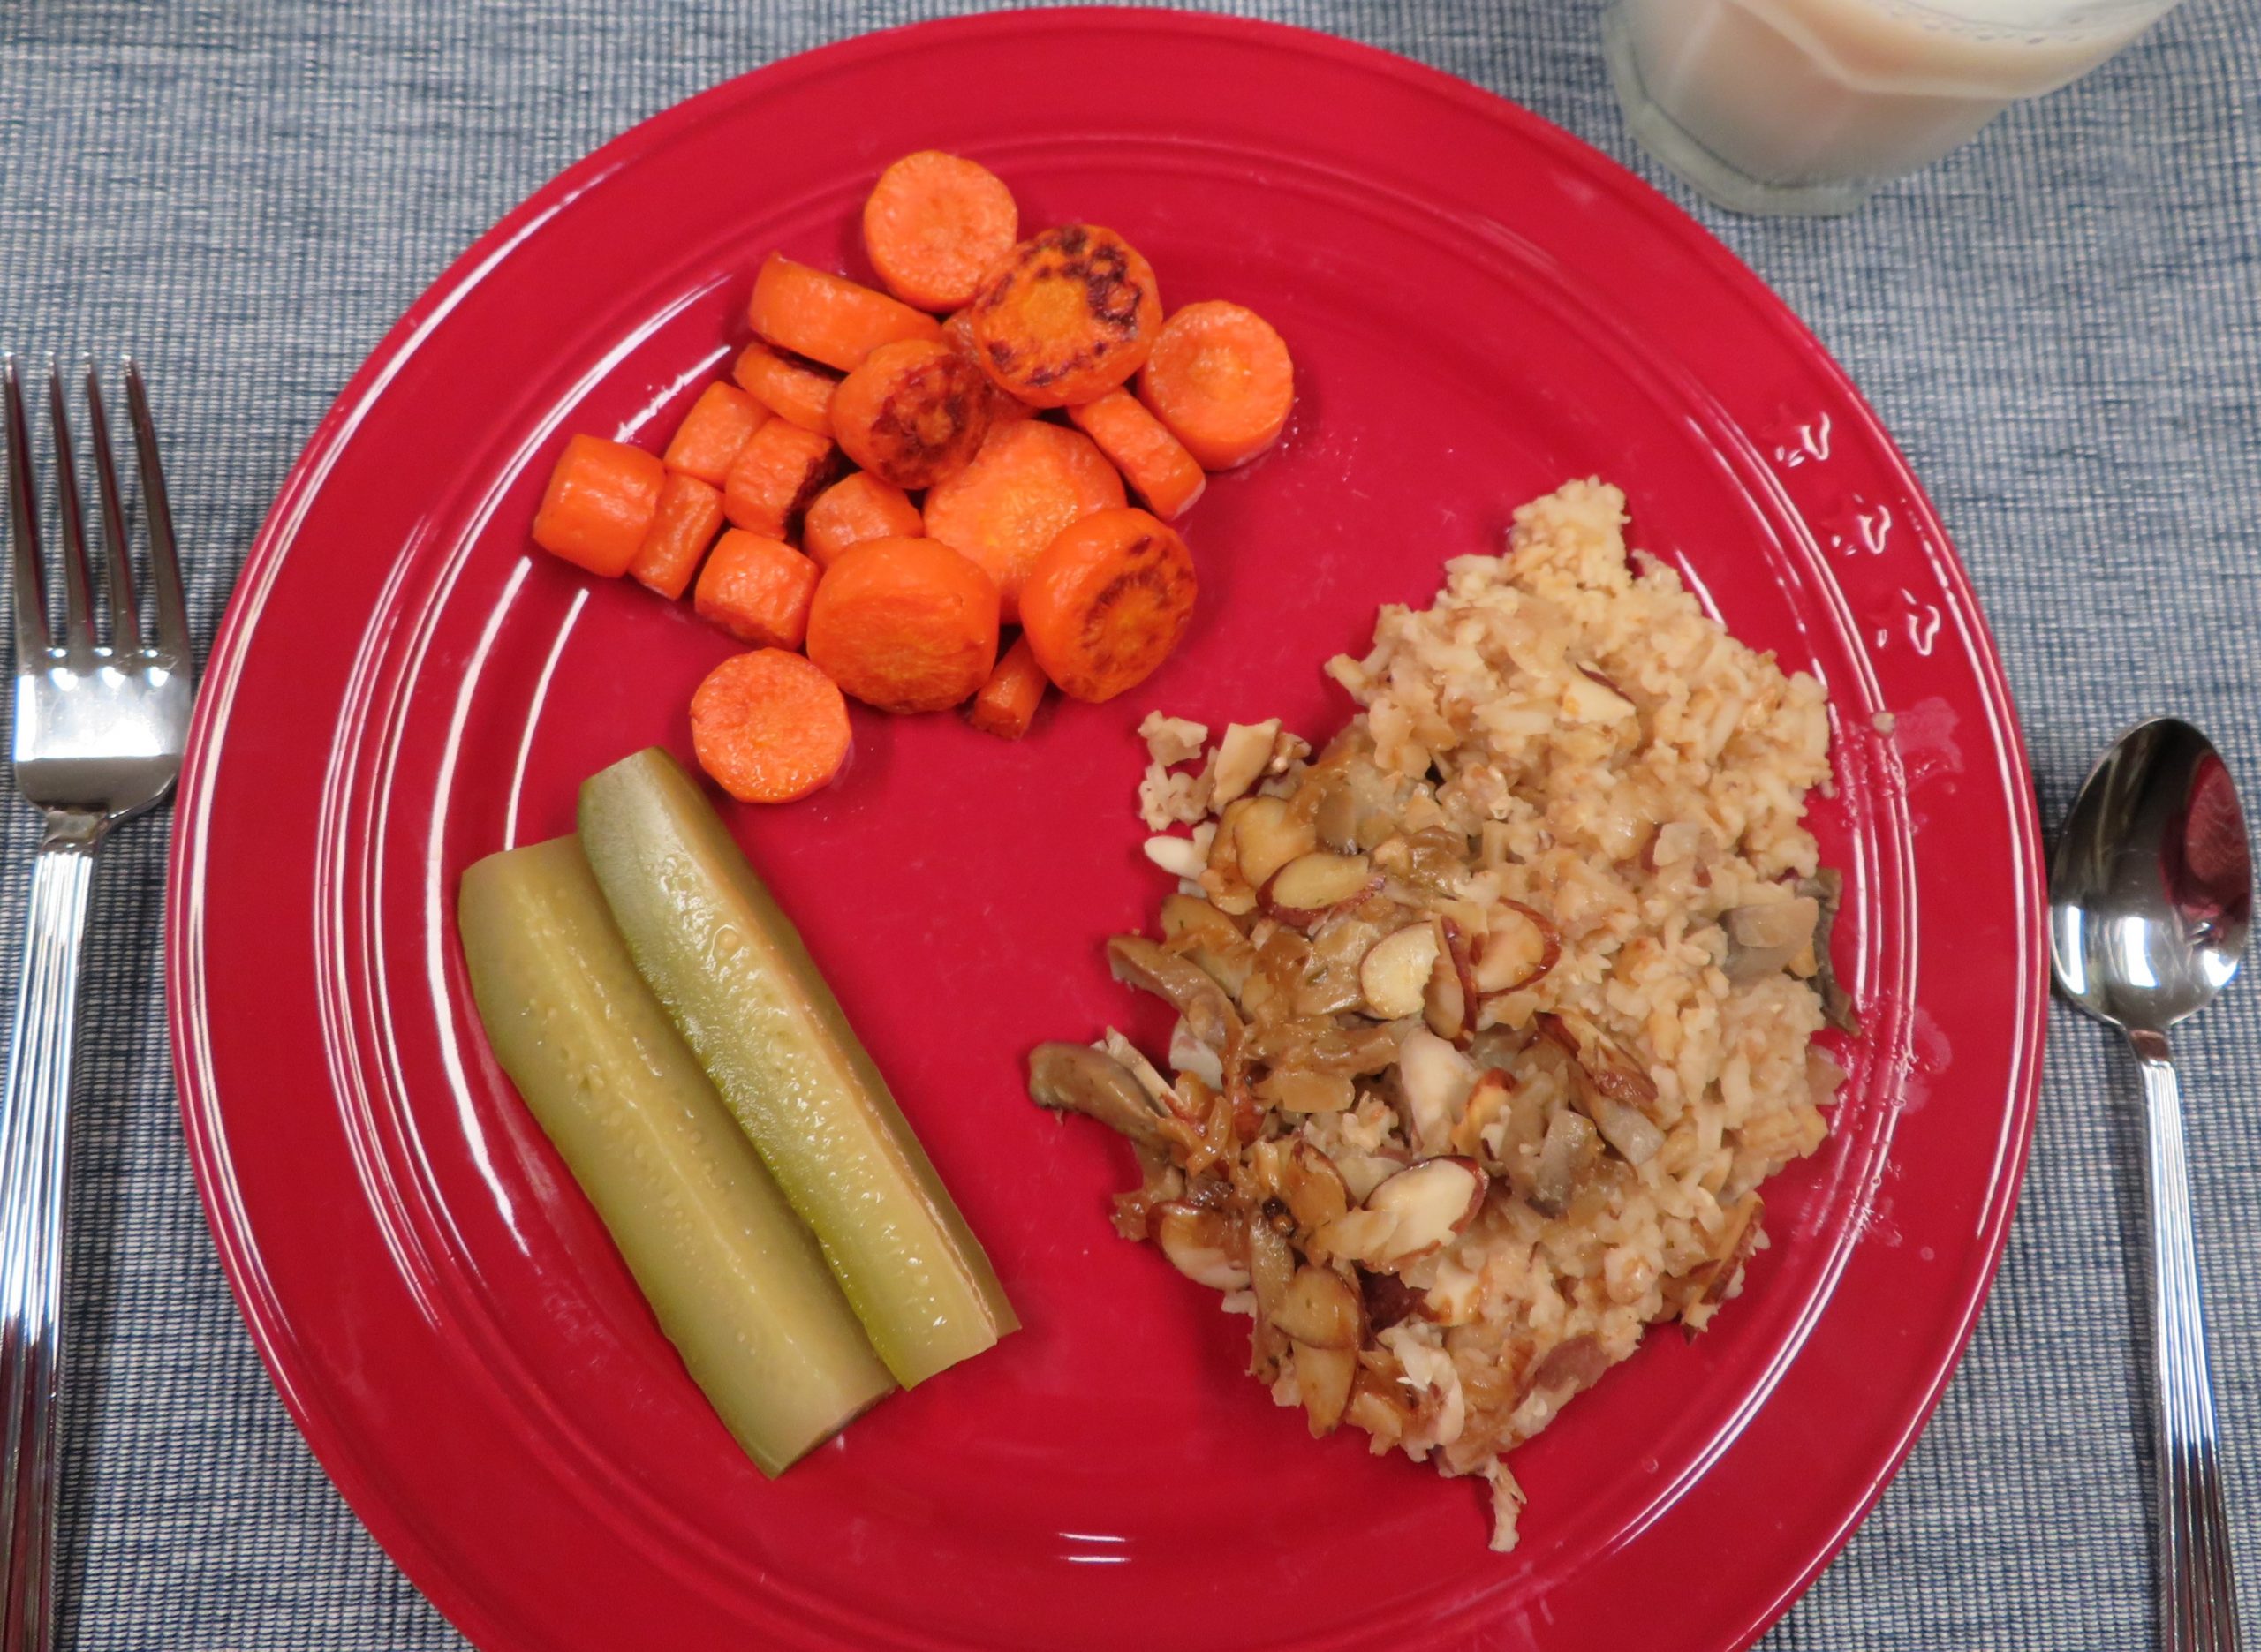 Four grain pilaf on a dinner plate with roasted carrots and dill pickles